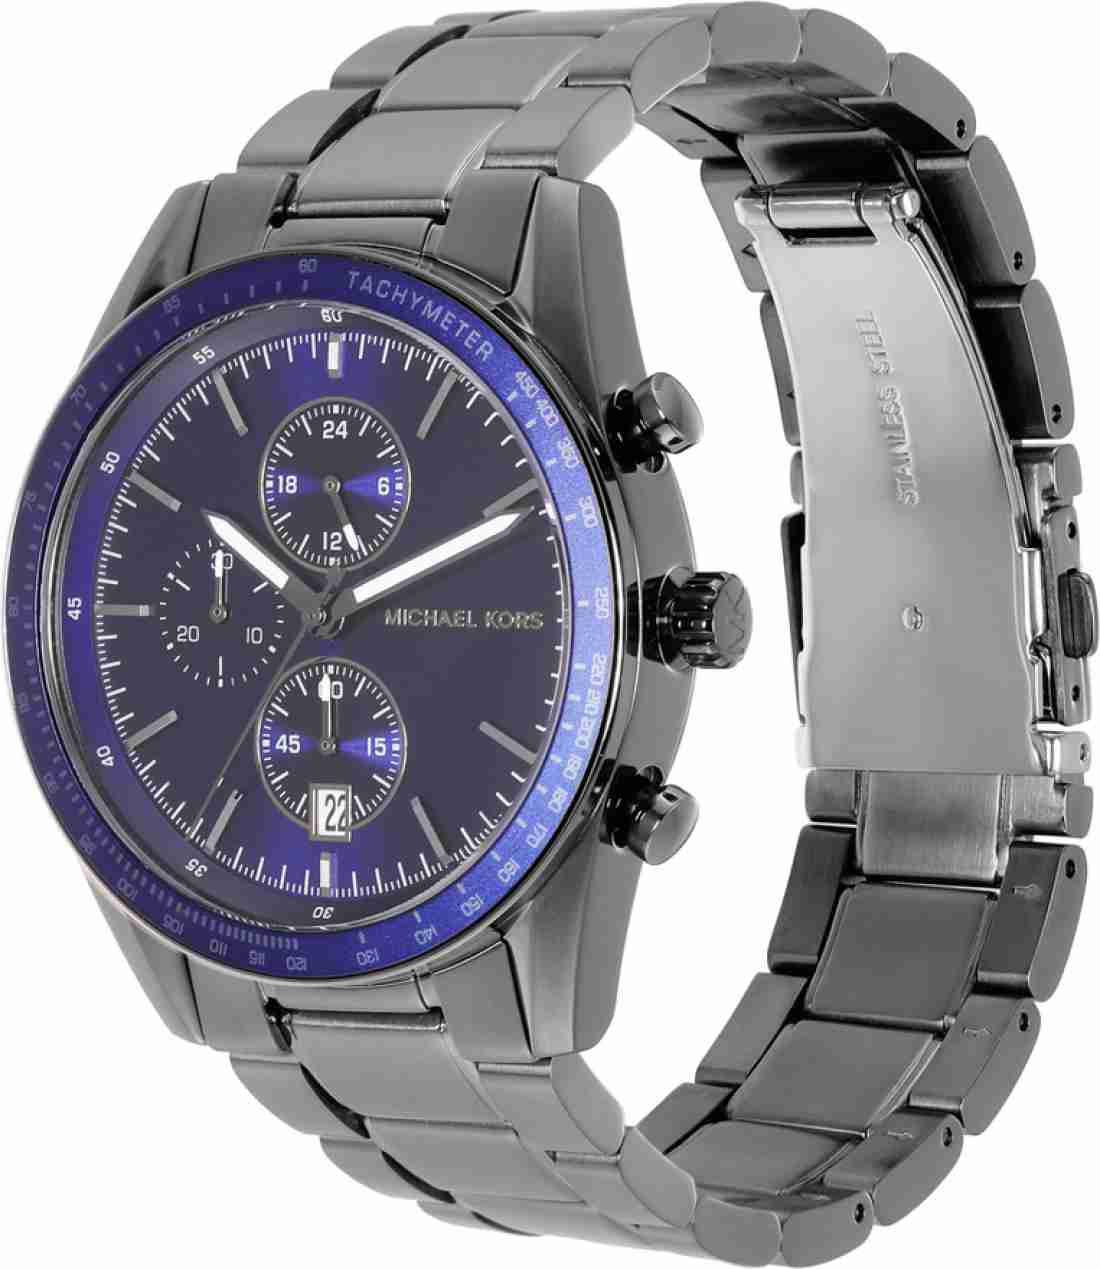 Accelerator Best KORS Analog Accelerator India Prices Buy Men Accelerator - Watch Watch For MK9111 Analog MICHAEL For in at Online Accelerator KORS - Men - MICHAEL